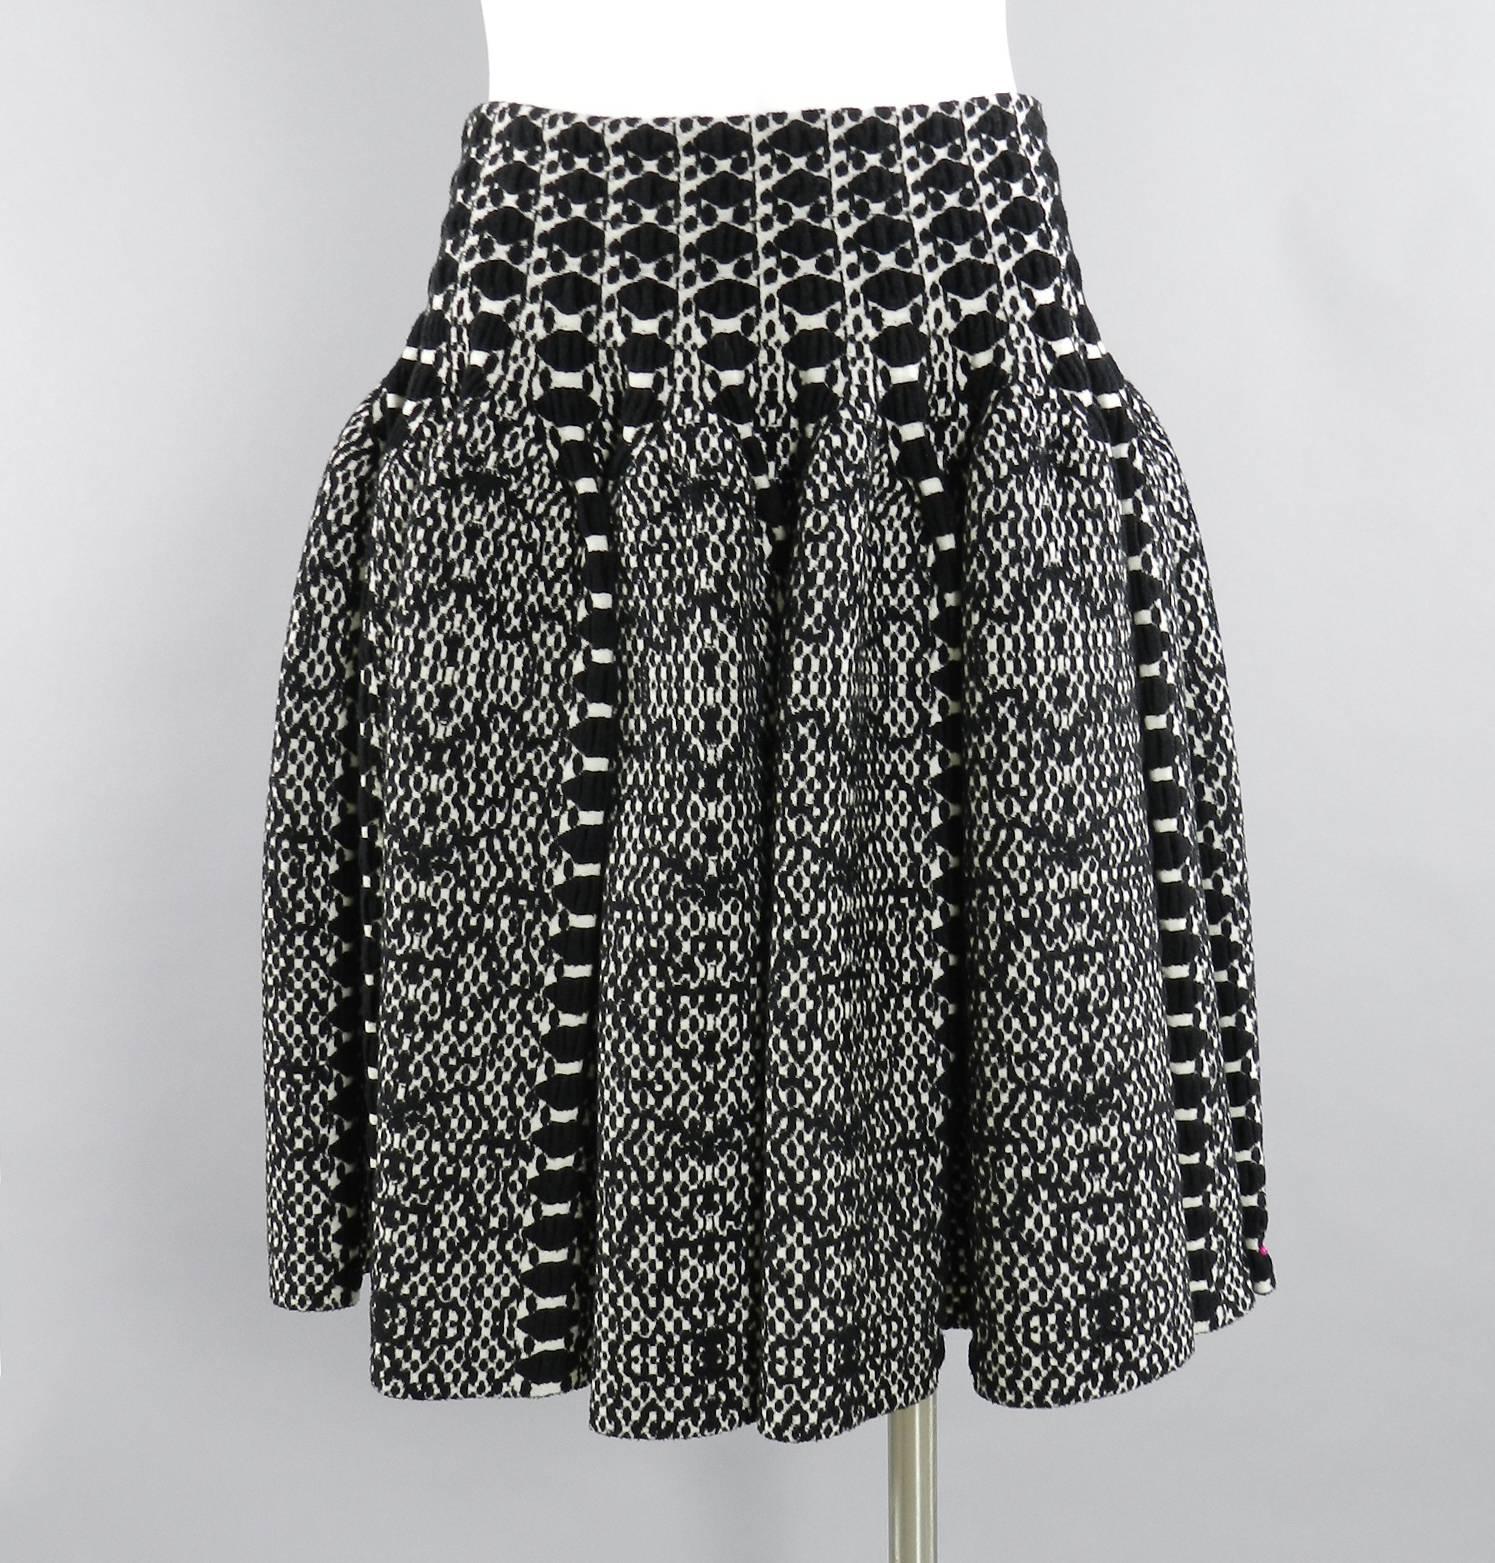 Azzedine Alaia black and white knit jersey peplum top and flare skirt.  Centre back zipper, elastic pull-on waist.  Excellent clean pre-owned condition. Worn once if at all. Top is tagged size FR 40 and skirt 38. Overall best for USA 6. (alaia runs